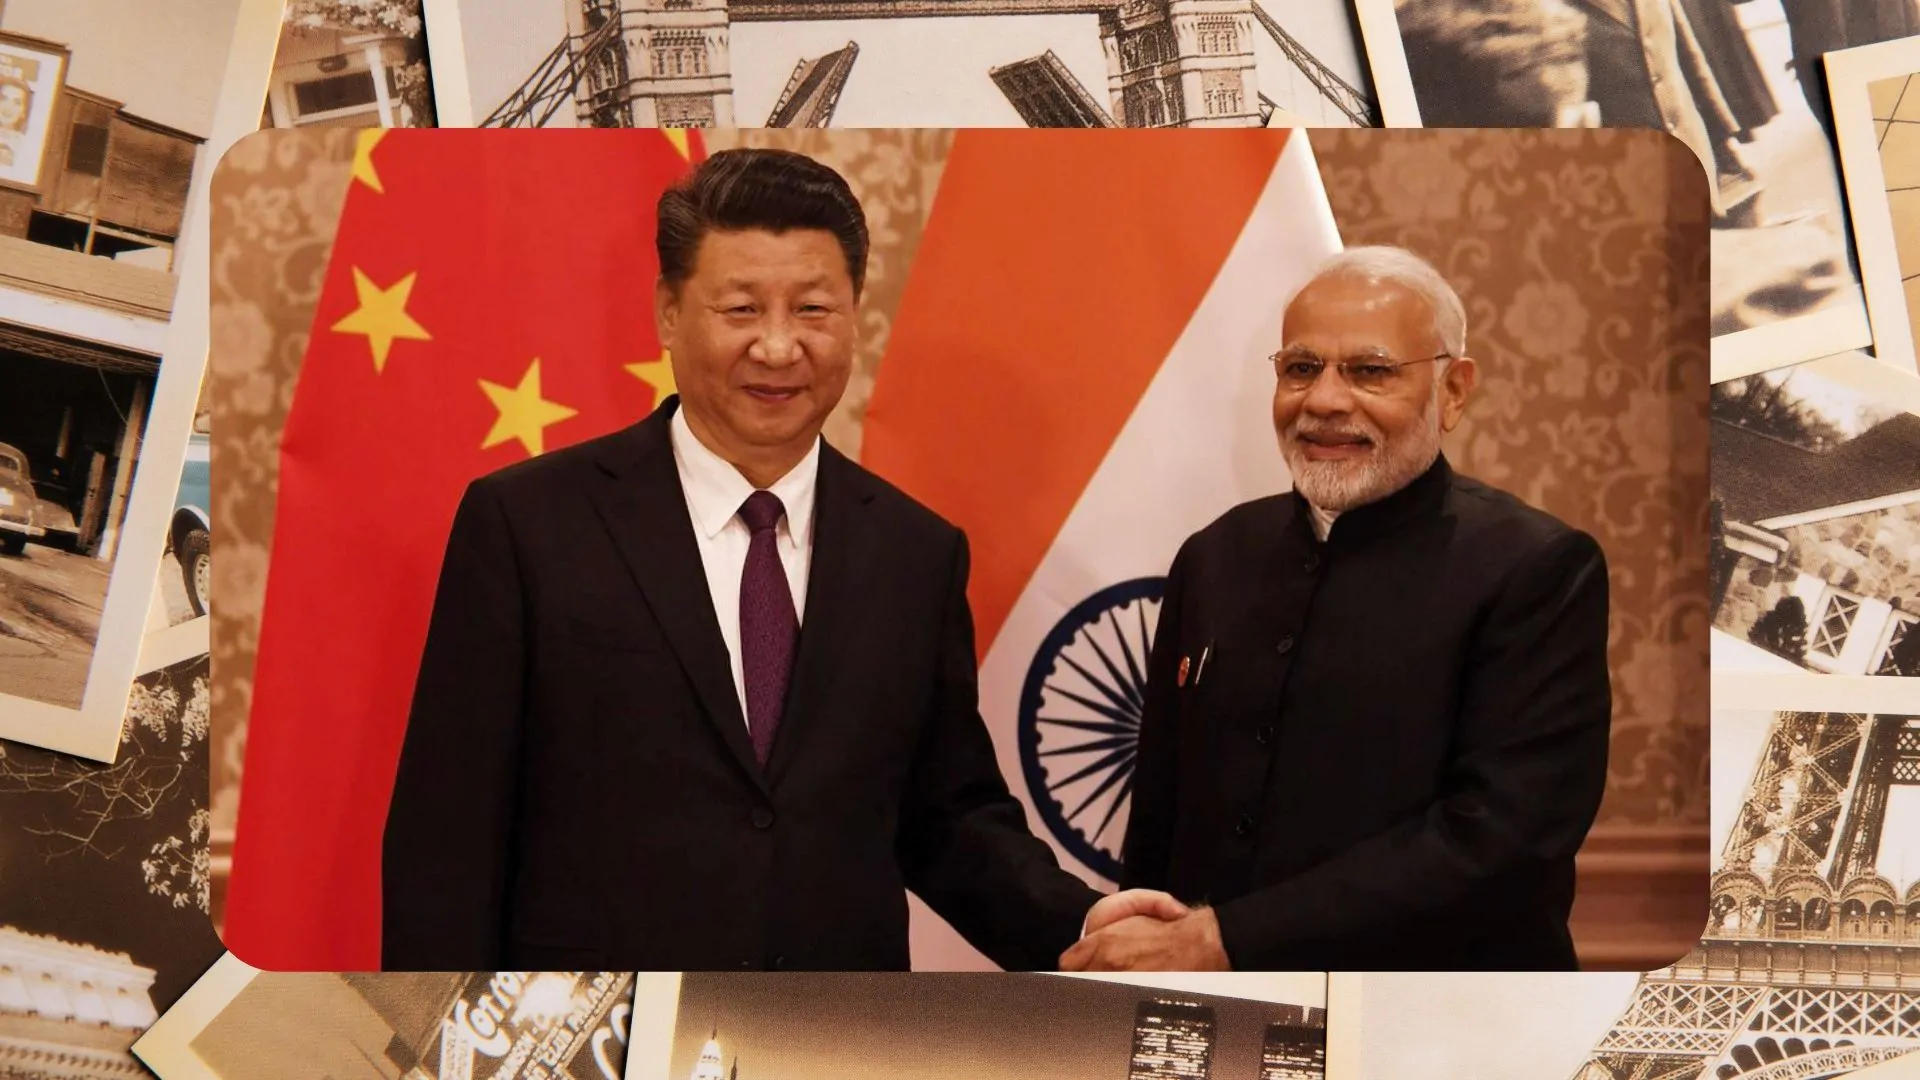 Discussions about India-China ties in Jakarta